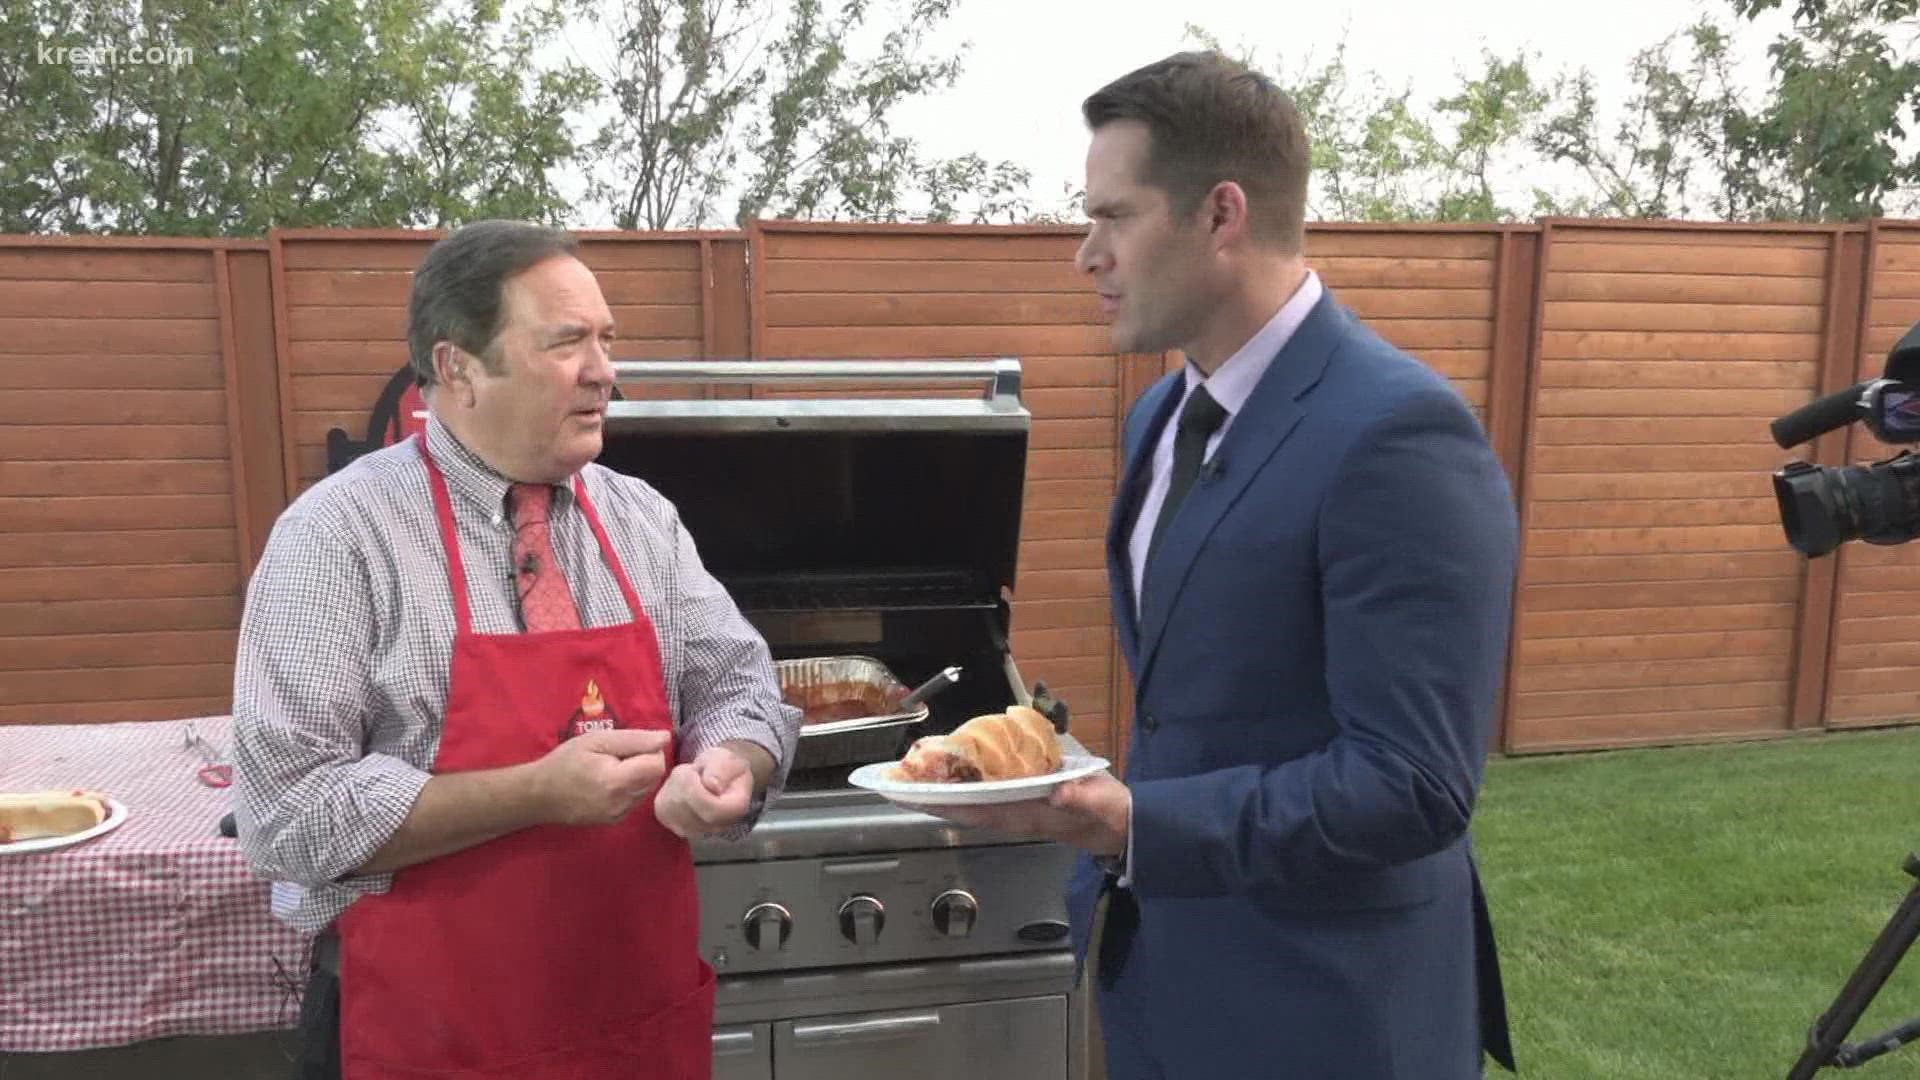 KREM's Tom Sherry has the weekday forecast and the recipe for grilled meatballs on Aug. 12, 2021 at 6 p.m.